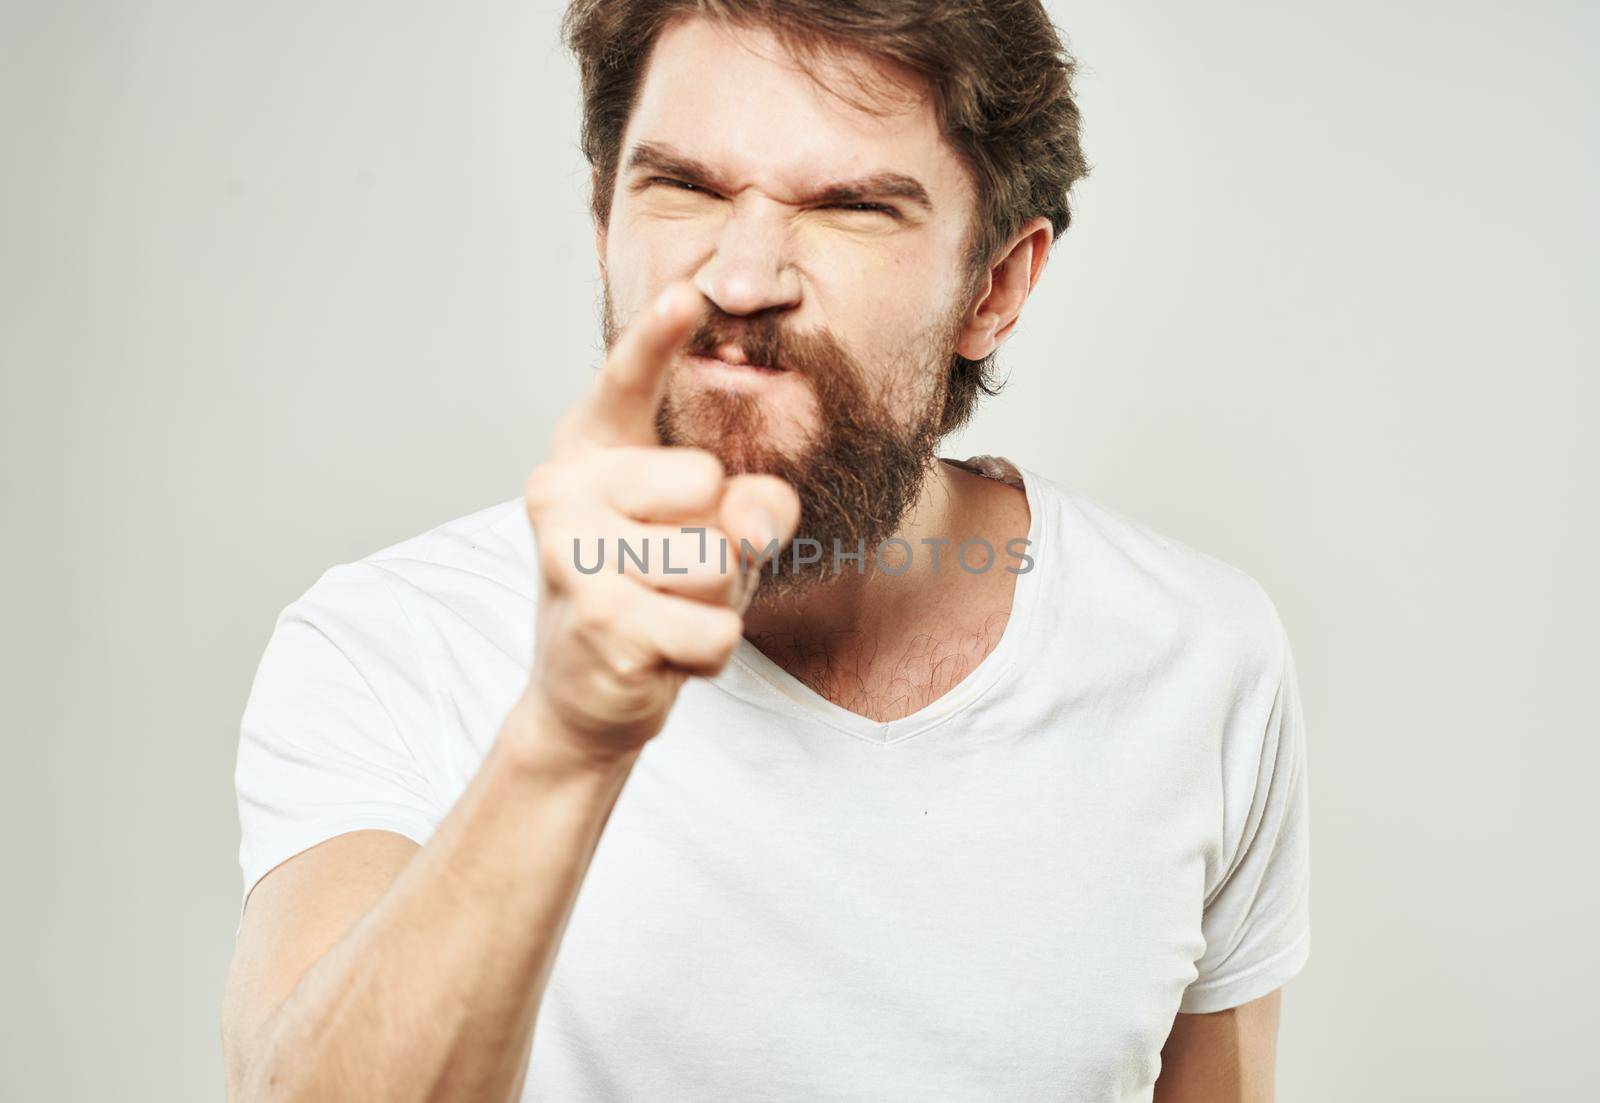 emotional man gesturing with his hands on a light background aggression scream by SHOTPRIME